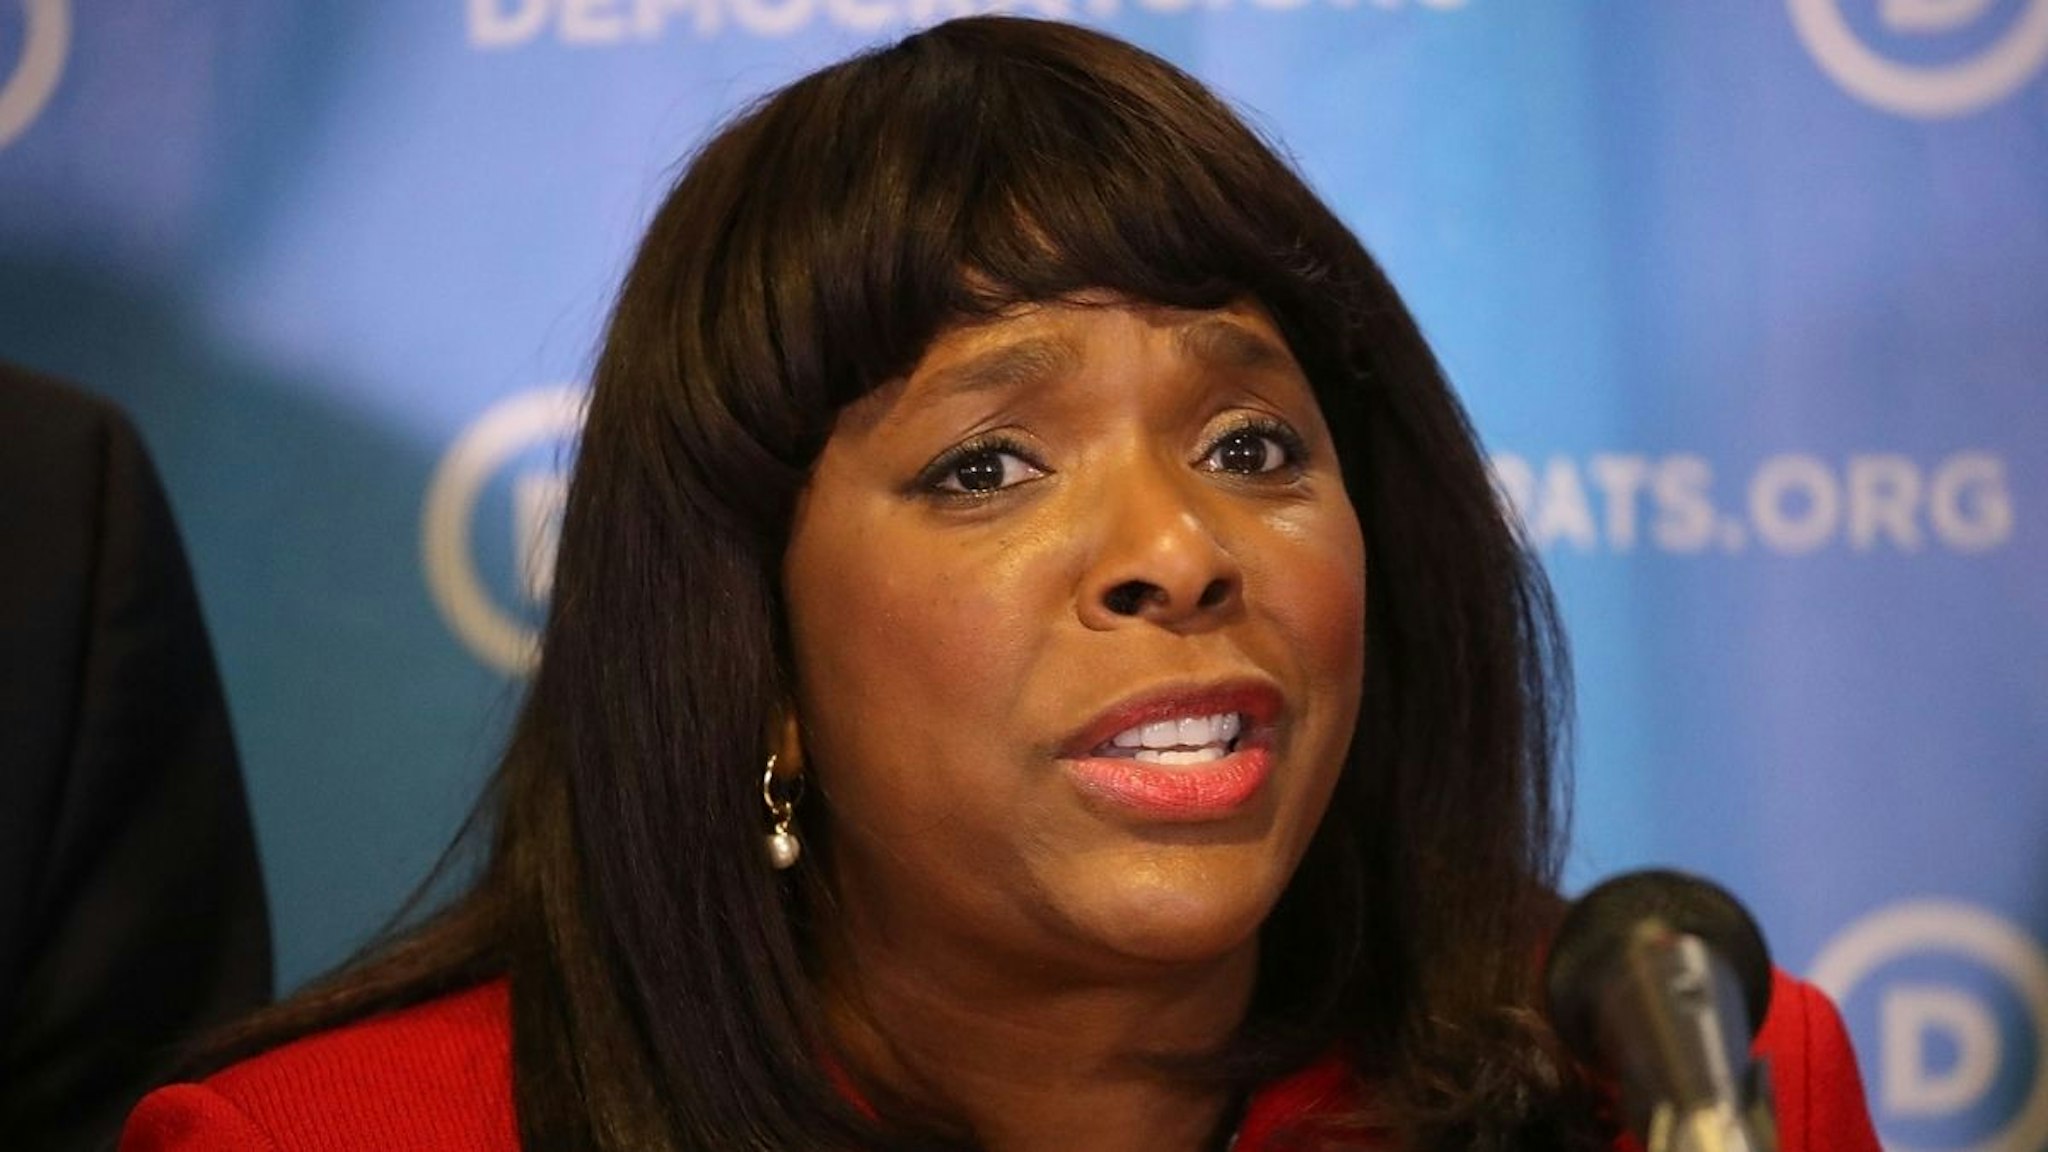 Rep. Terri Sewell (D-AL) speaks during a press conference held at the Democratic National Headquarters on July 19, 2017 in Washington, DC.